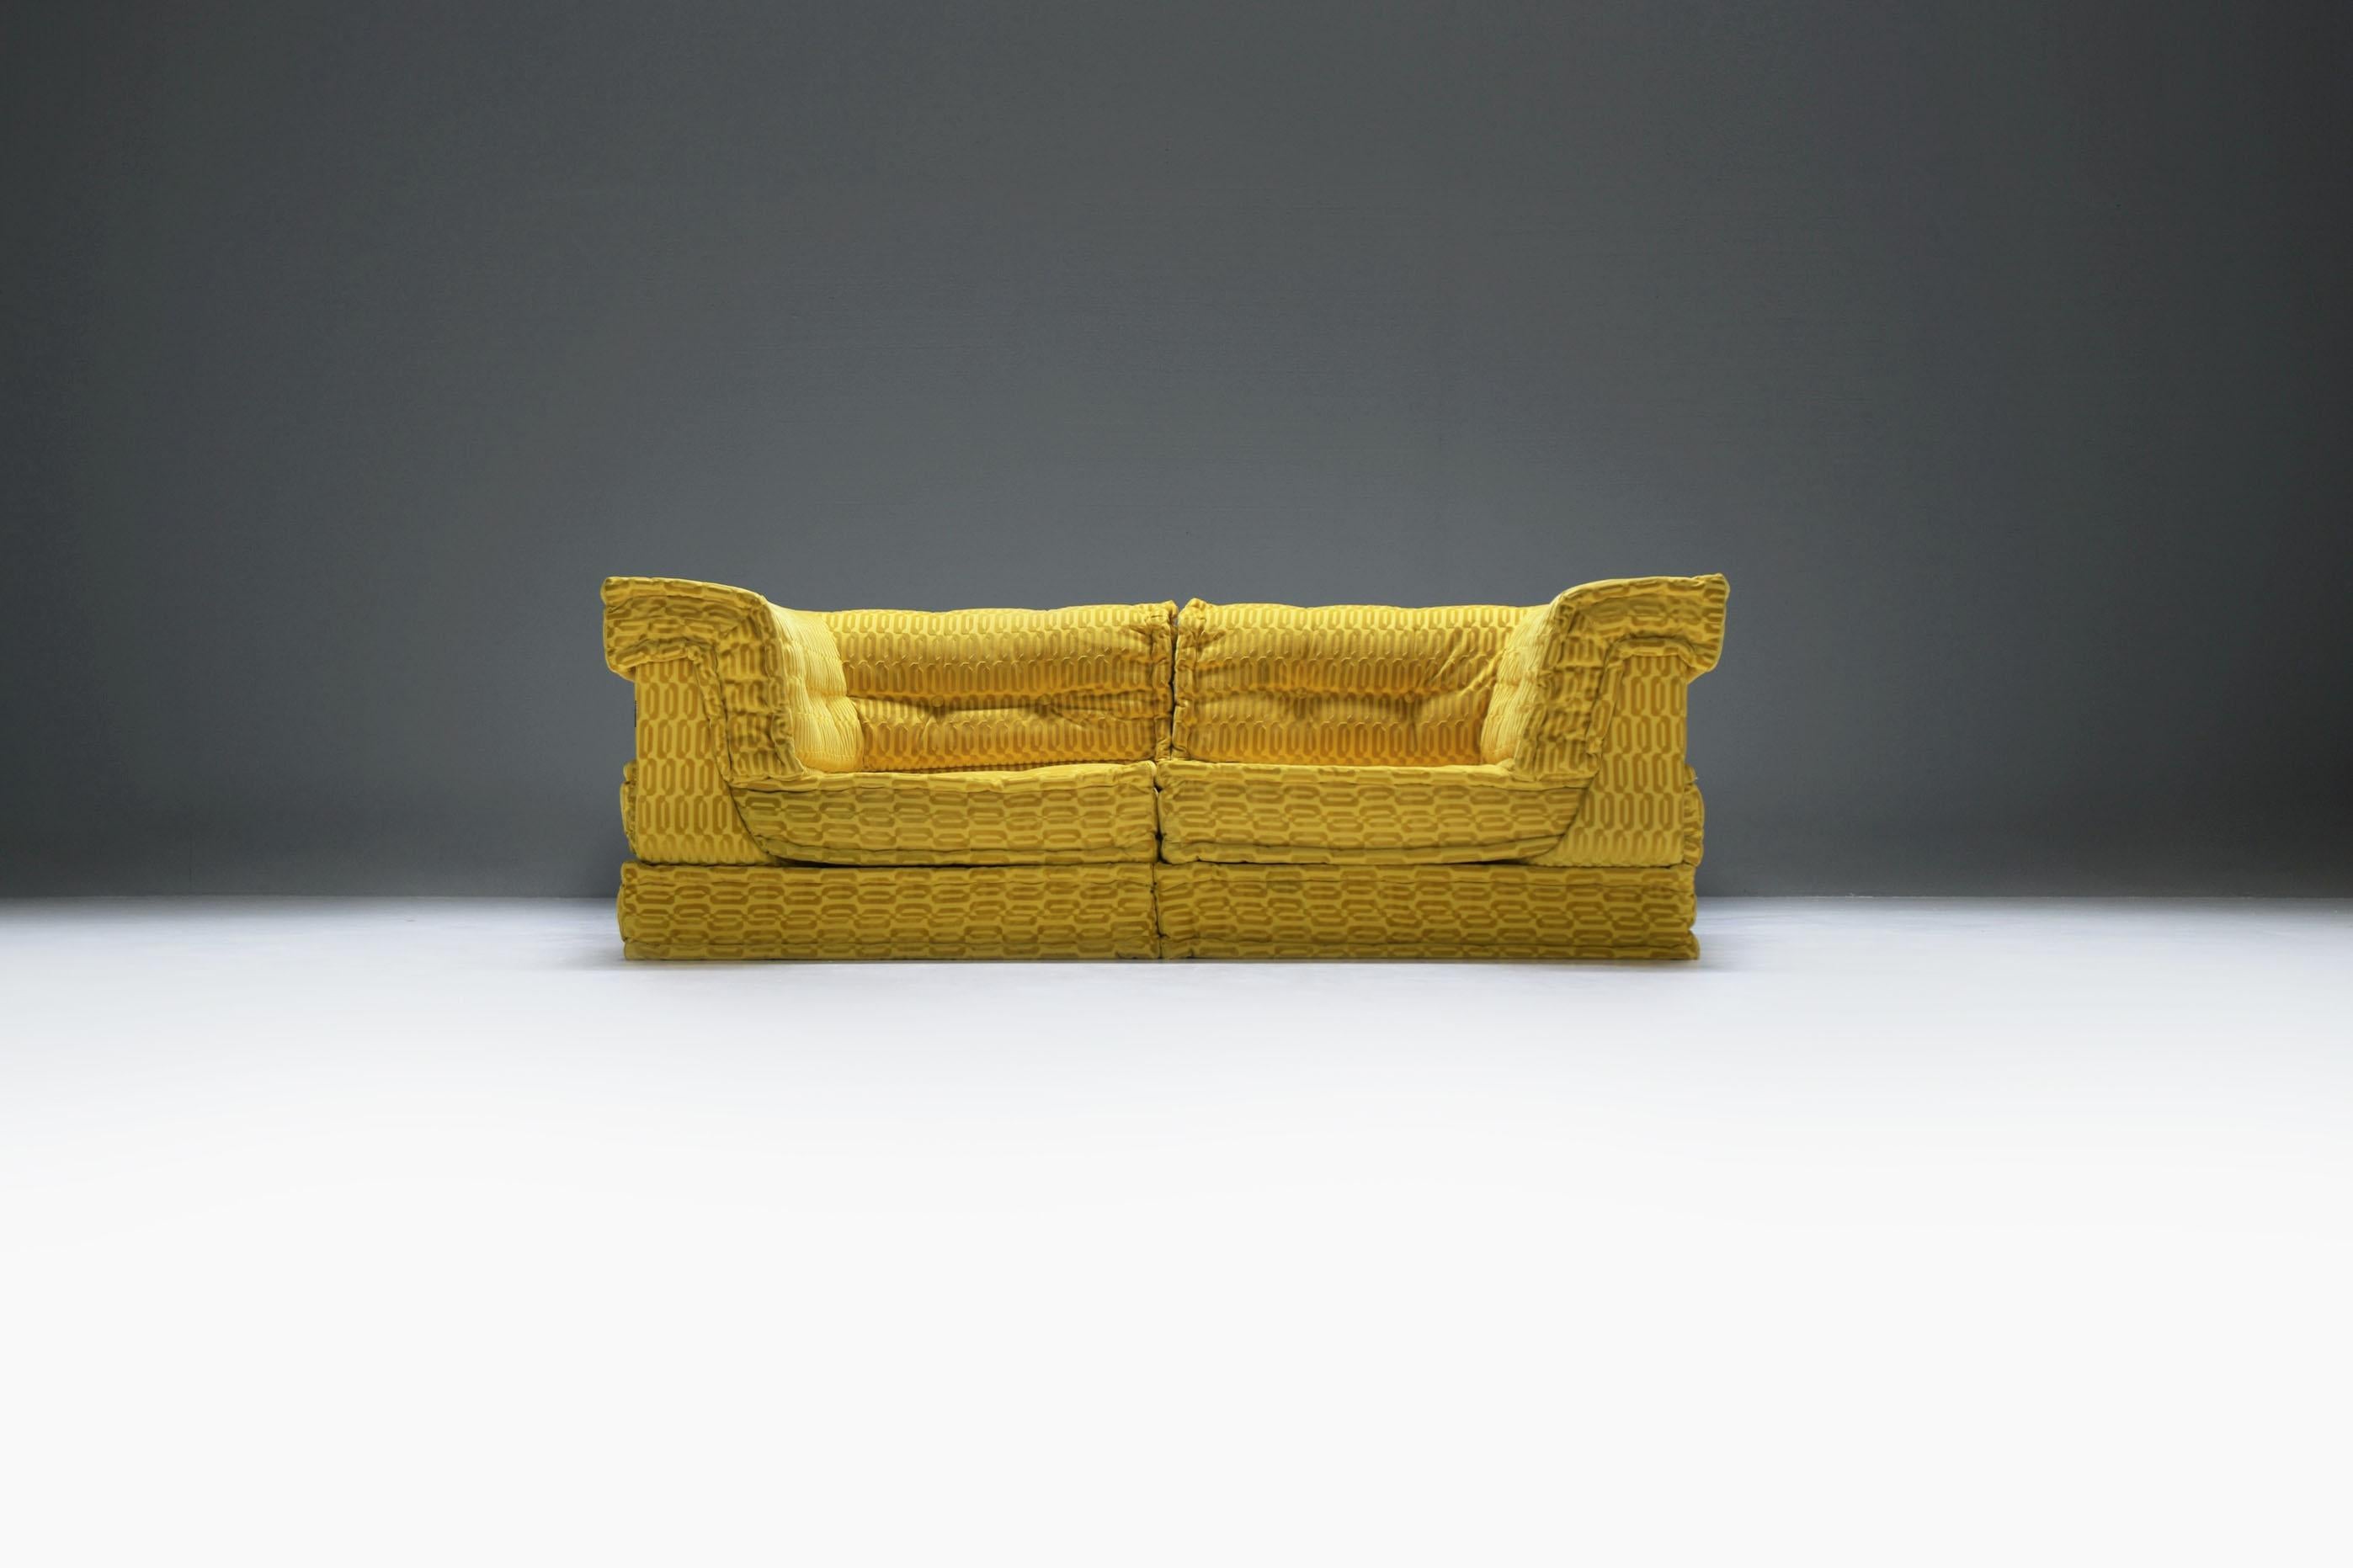 Extremely rare and stunning Mah Jong!  Roche Bobois created this one-of-a-kind sofa for a celebrity in a custom yellow/gold fabric. The choice of the vibrant yellow/gold fabric adds a touch of luxury and elegance to the piece, making it a standout